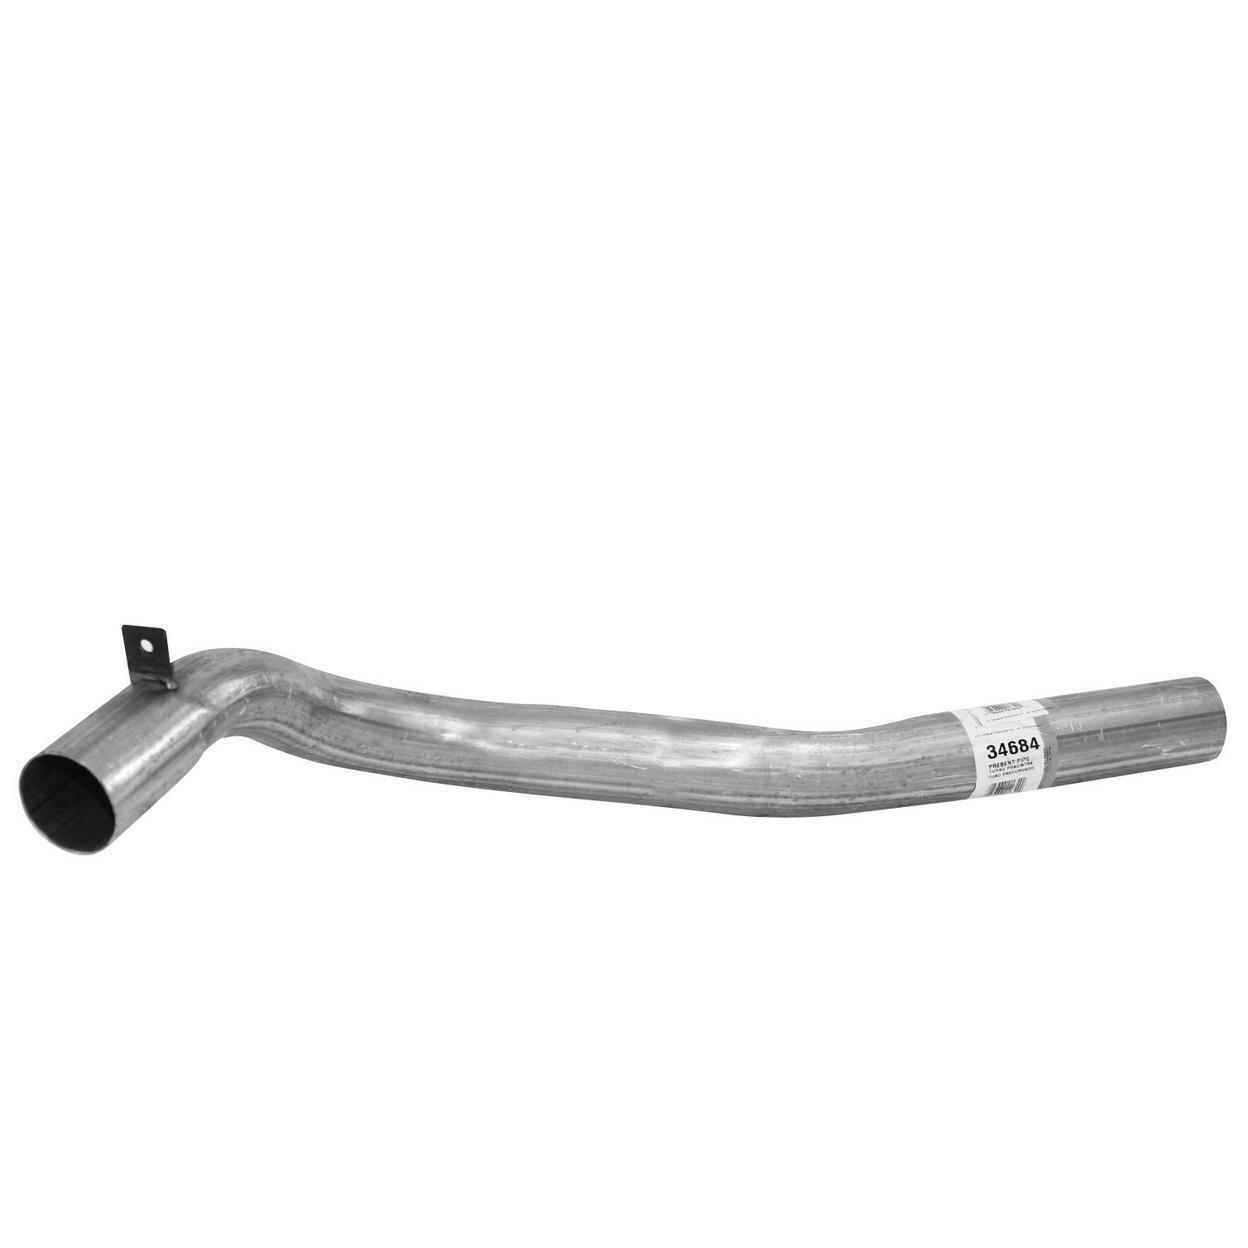 34684-TO Exhaust Tail Pipe Fits 1979 Oldsmobile Cutlass Salon Hurst 5.7L V8 GAS